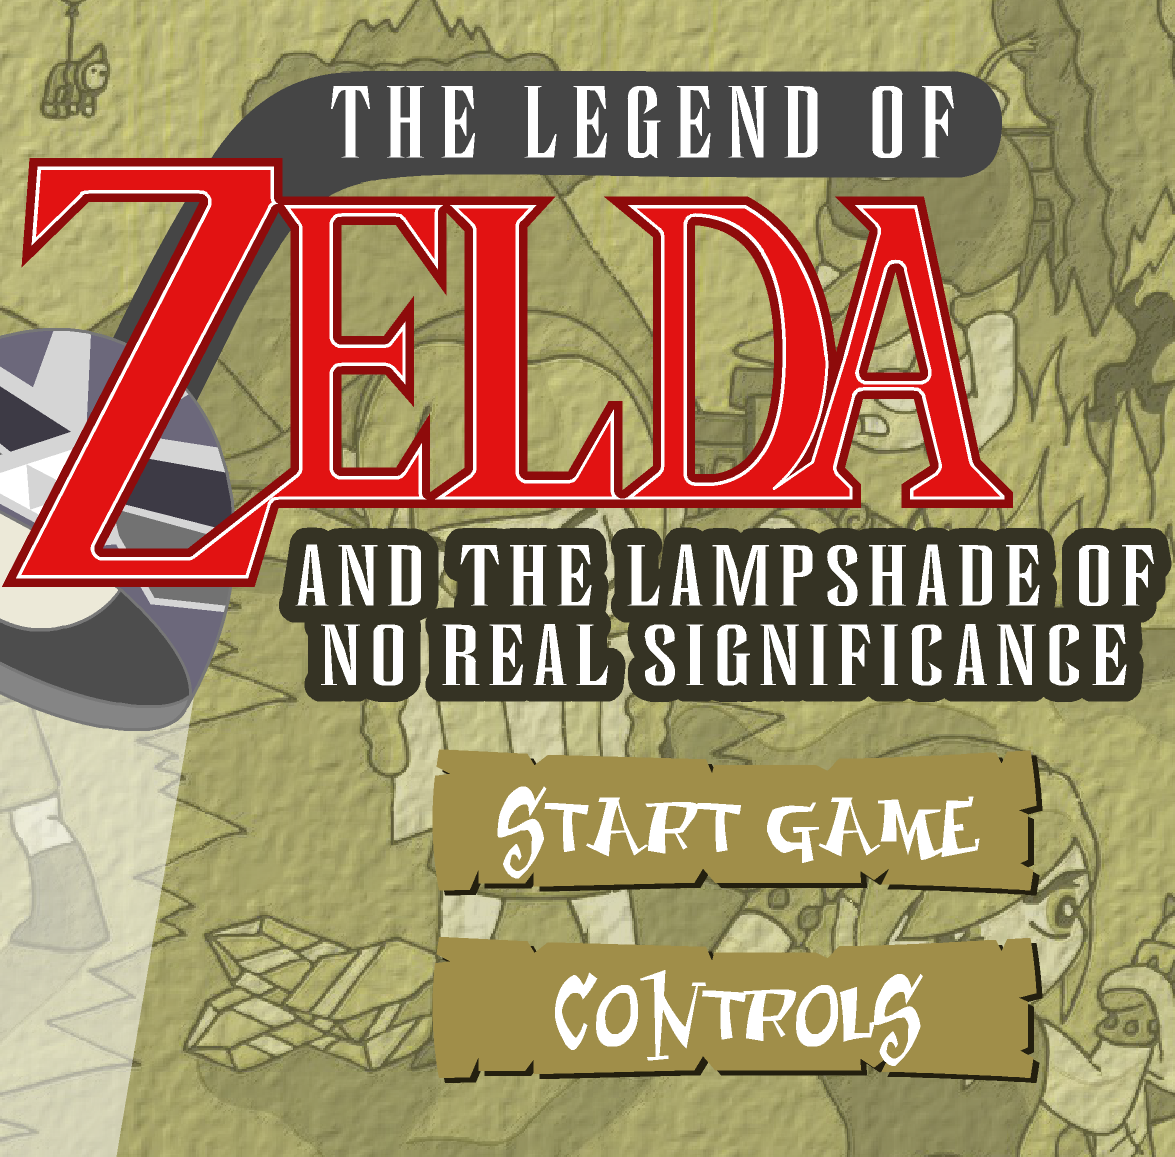 Zelda and the Lampshade of no Real Significance